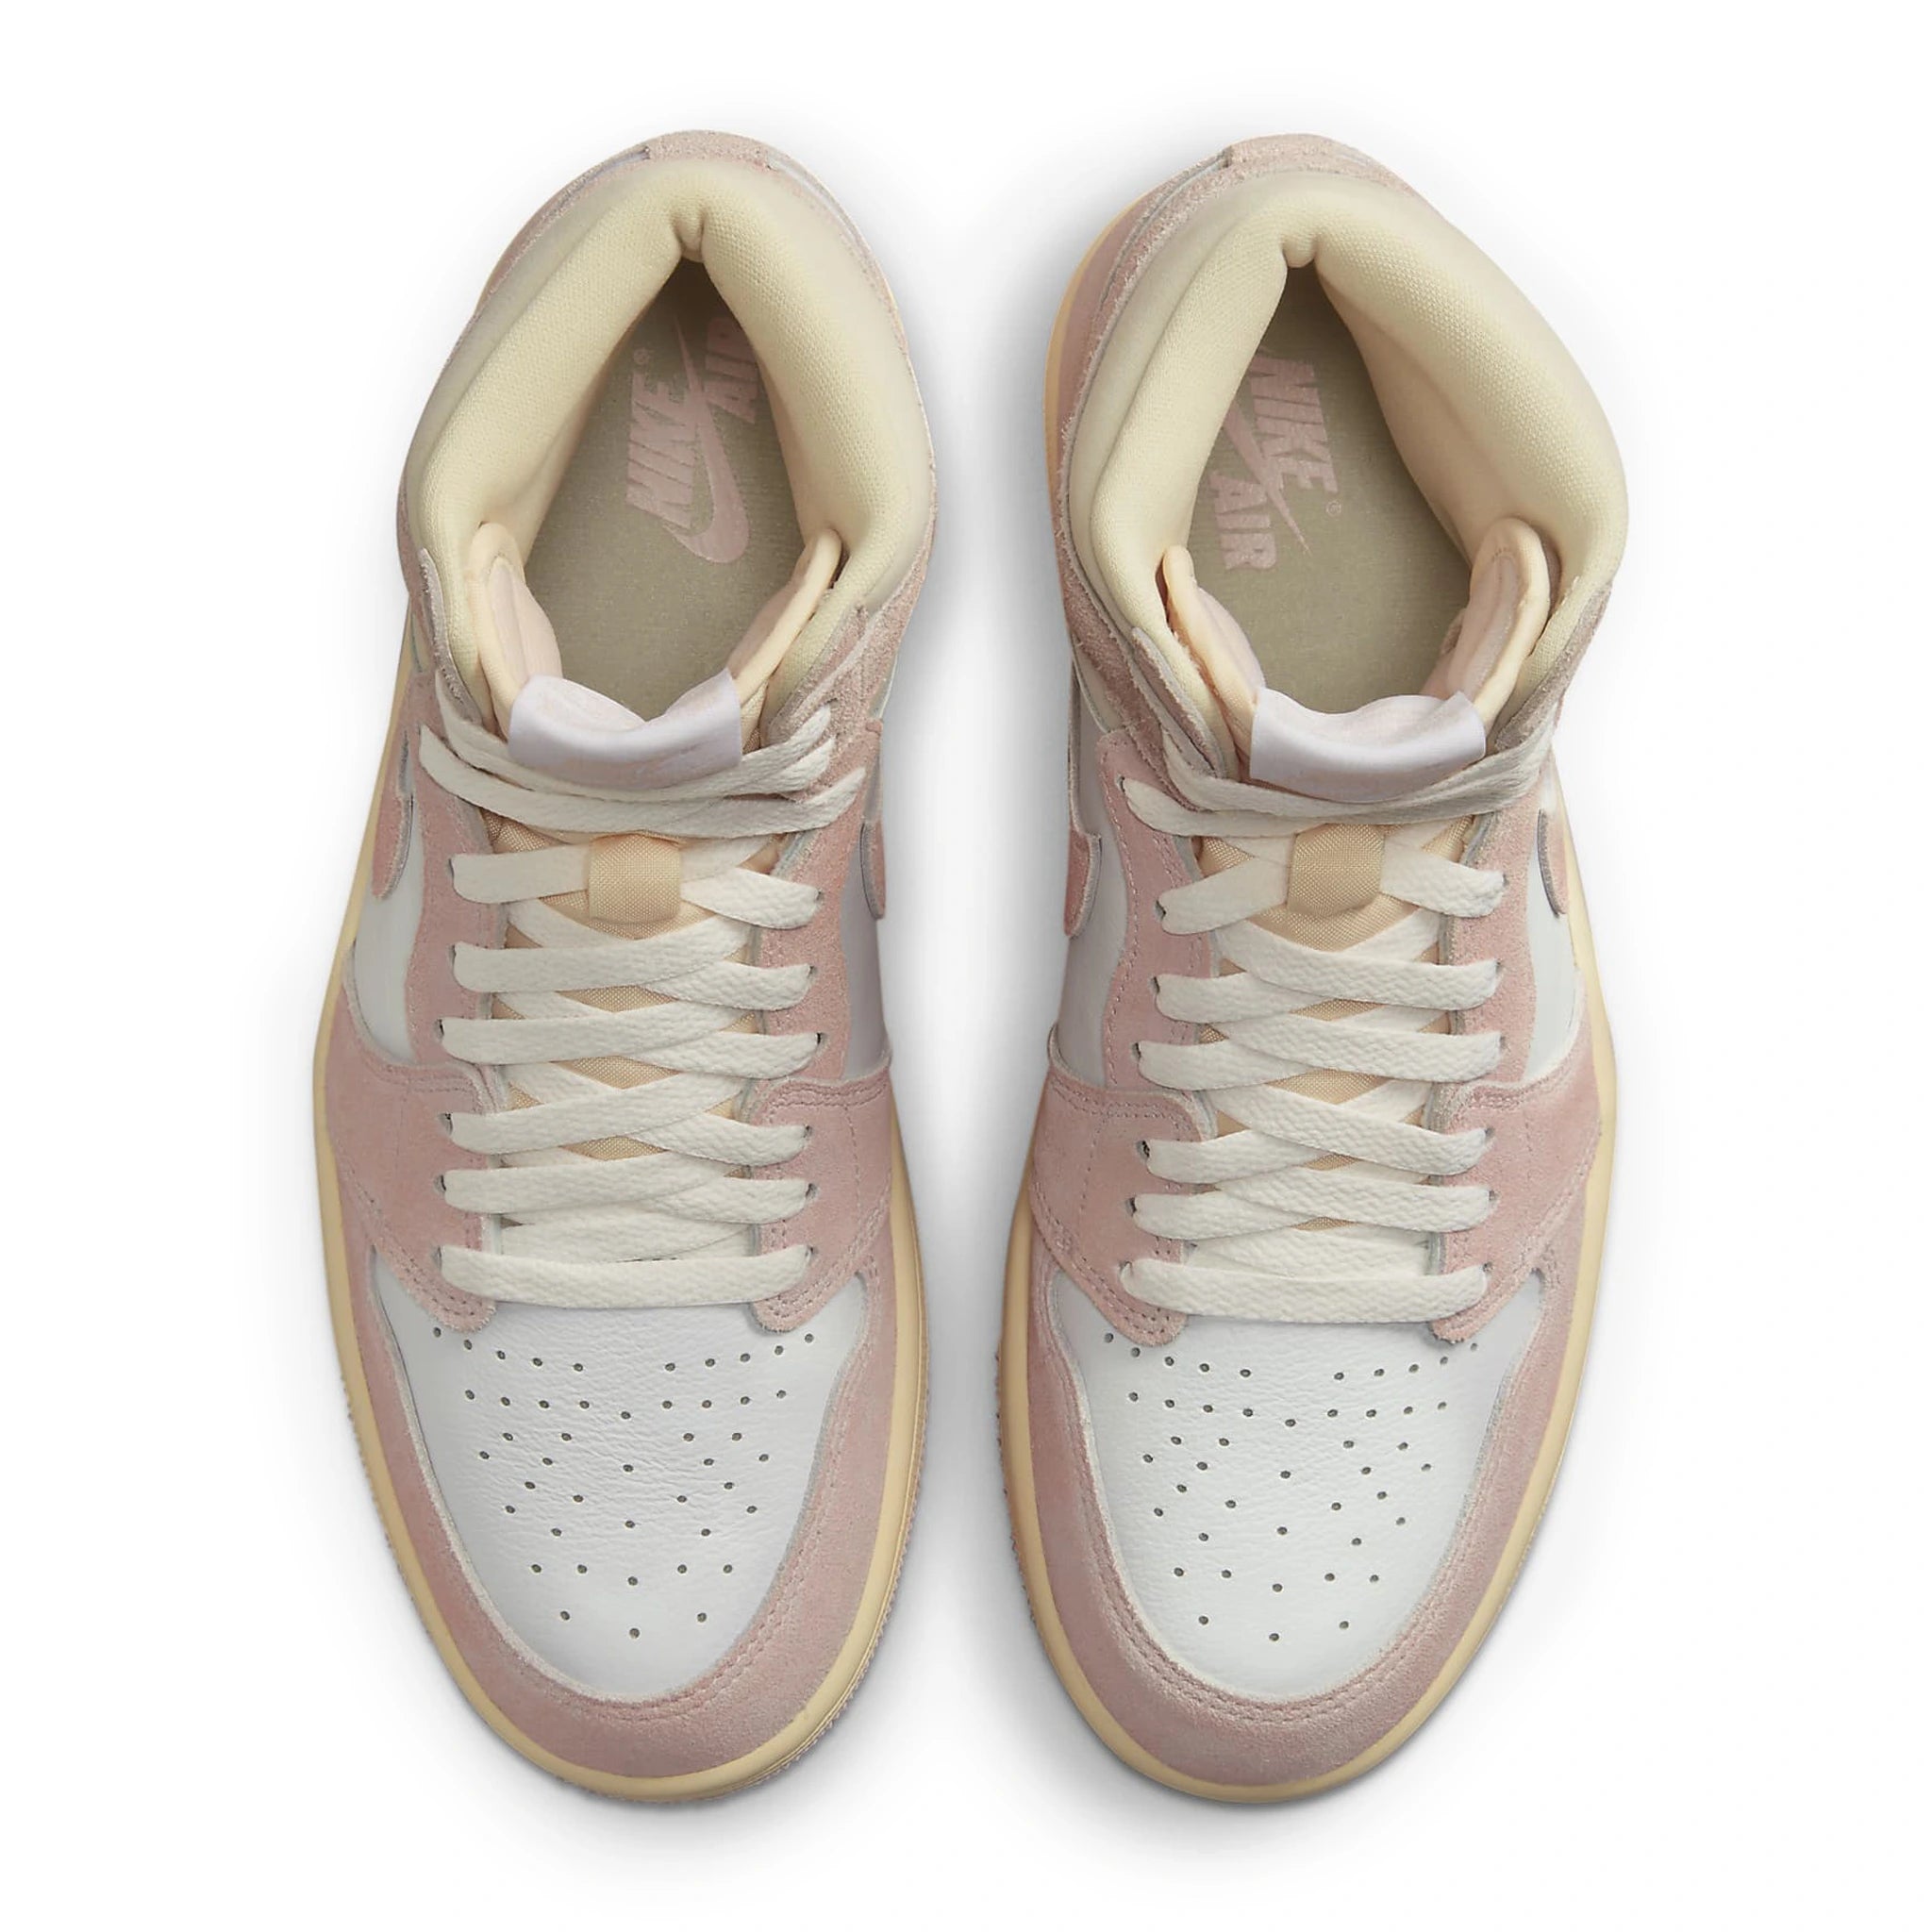 Top view of Air Jordan 1 Retro High OG Washed Pink (W) FD2596-600